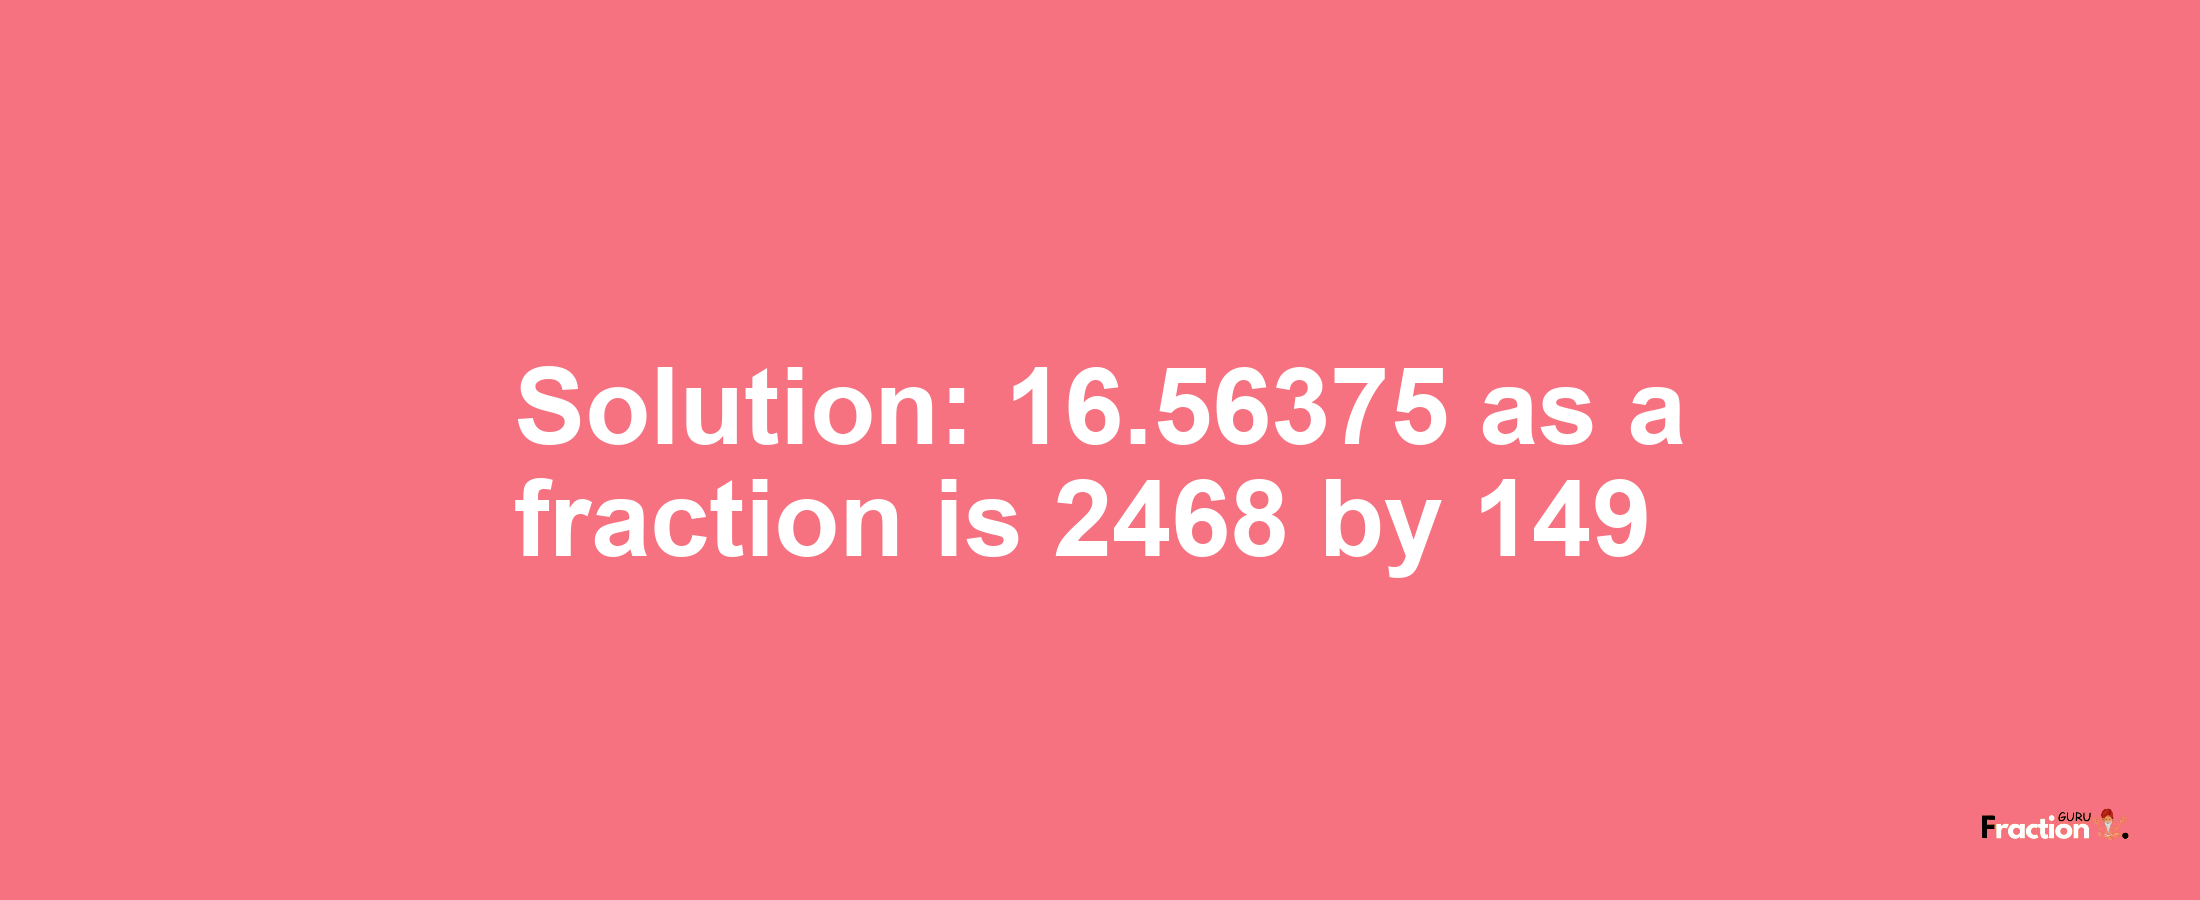 Solution:16.56375 as a fraction is 2468/149